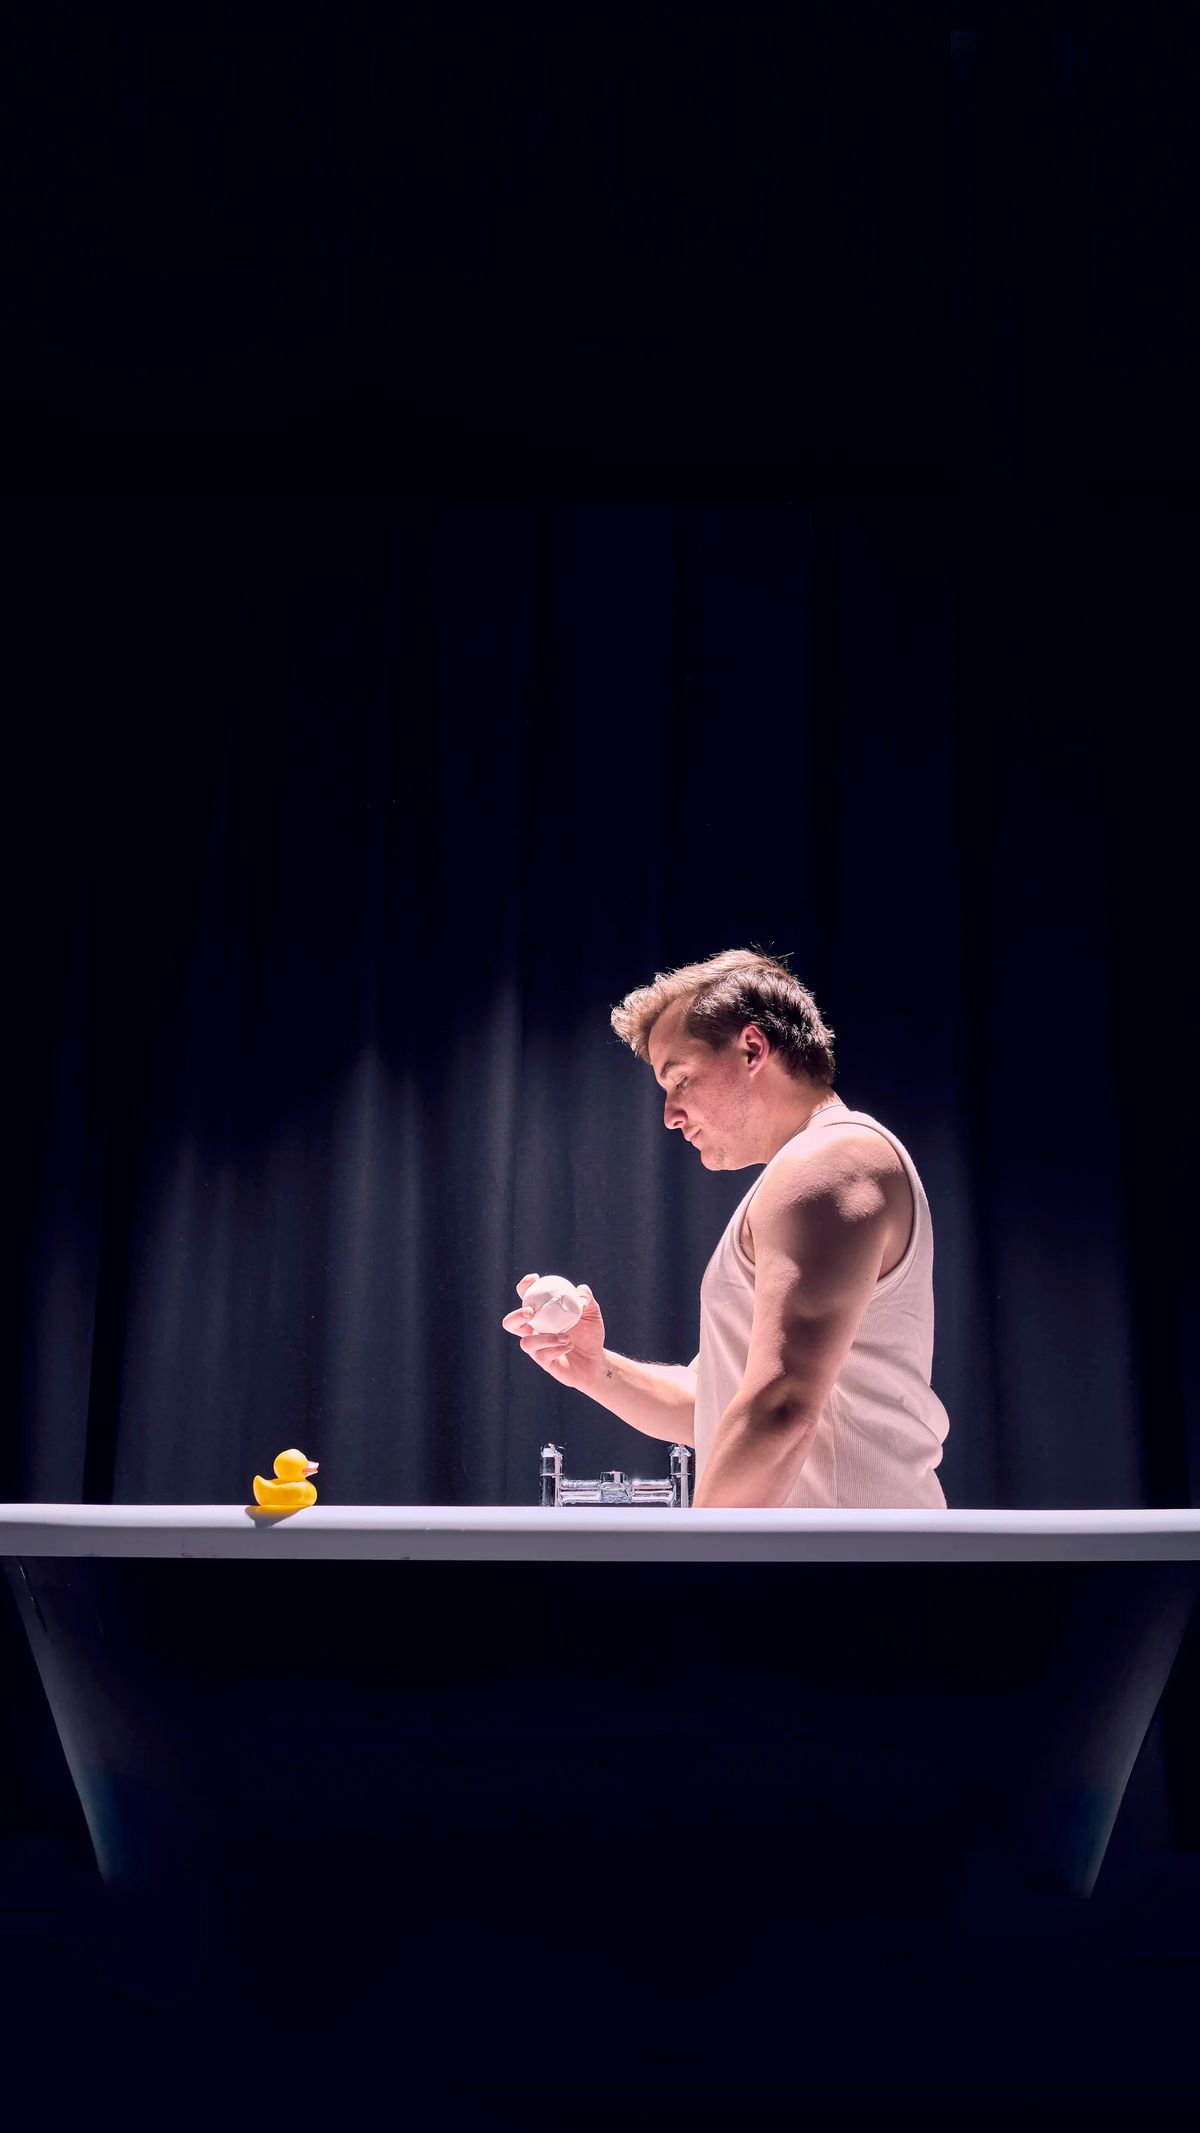 A man stands in a dramatically lit bathtumb. He wears a white tanktop and holds a white bathbomb, looking at it intensely. 